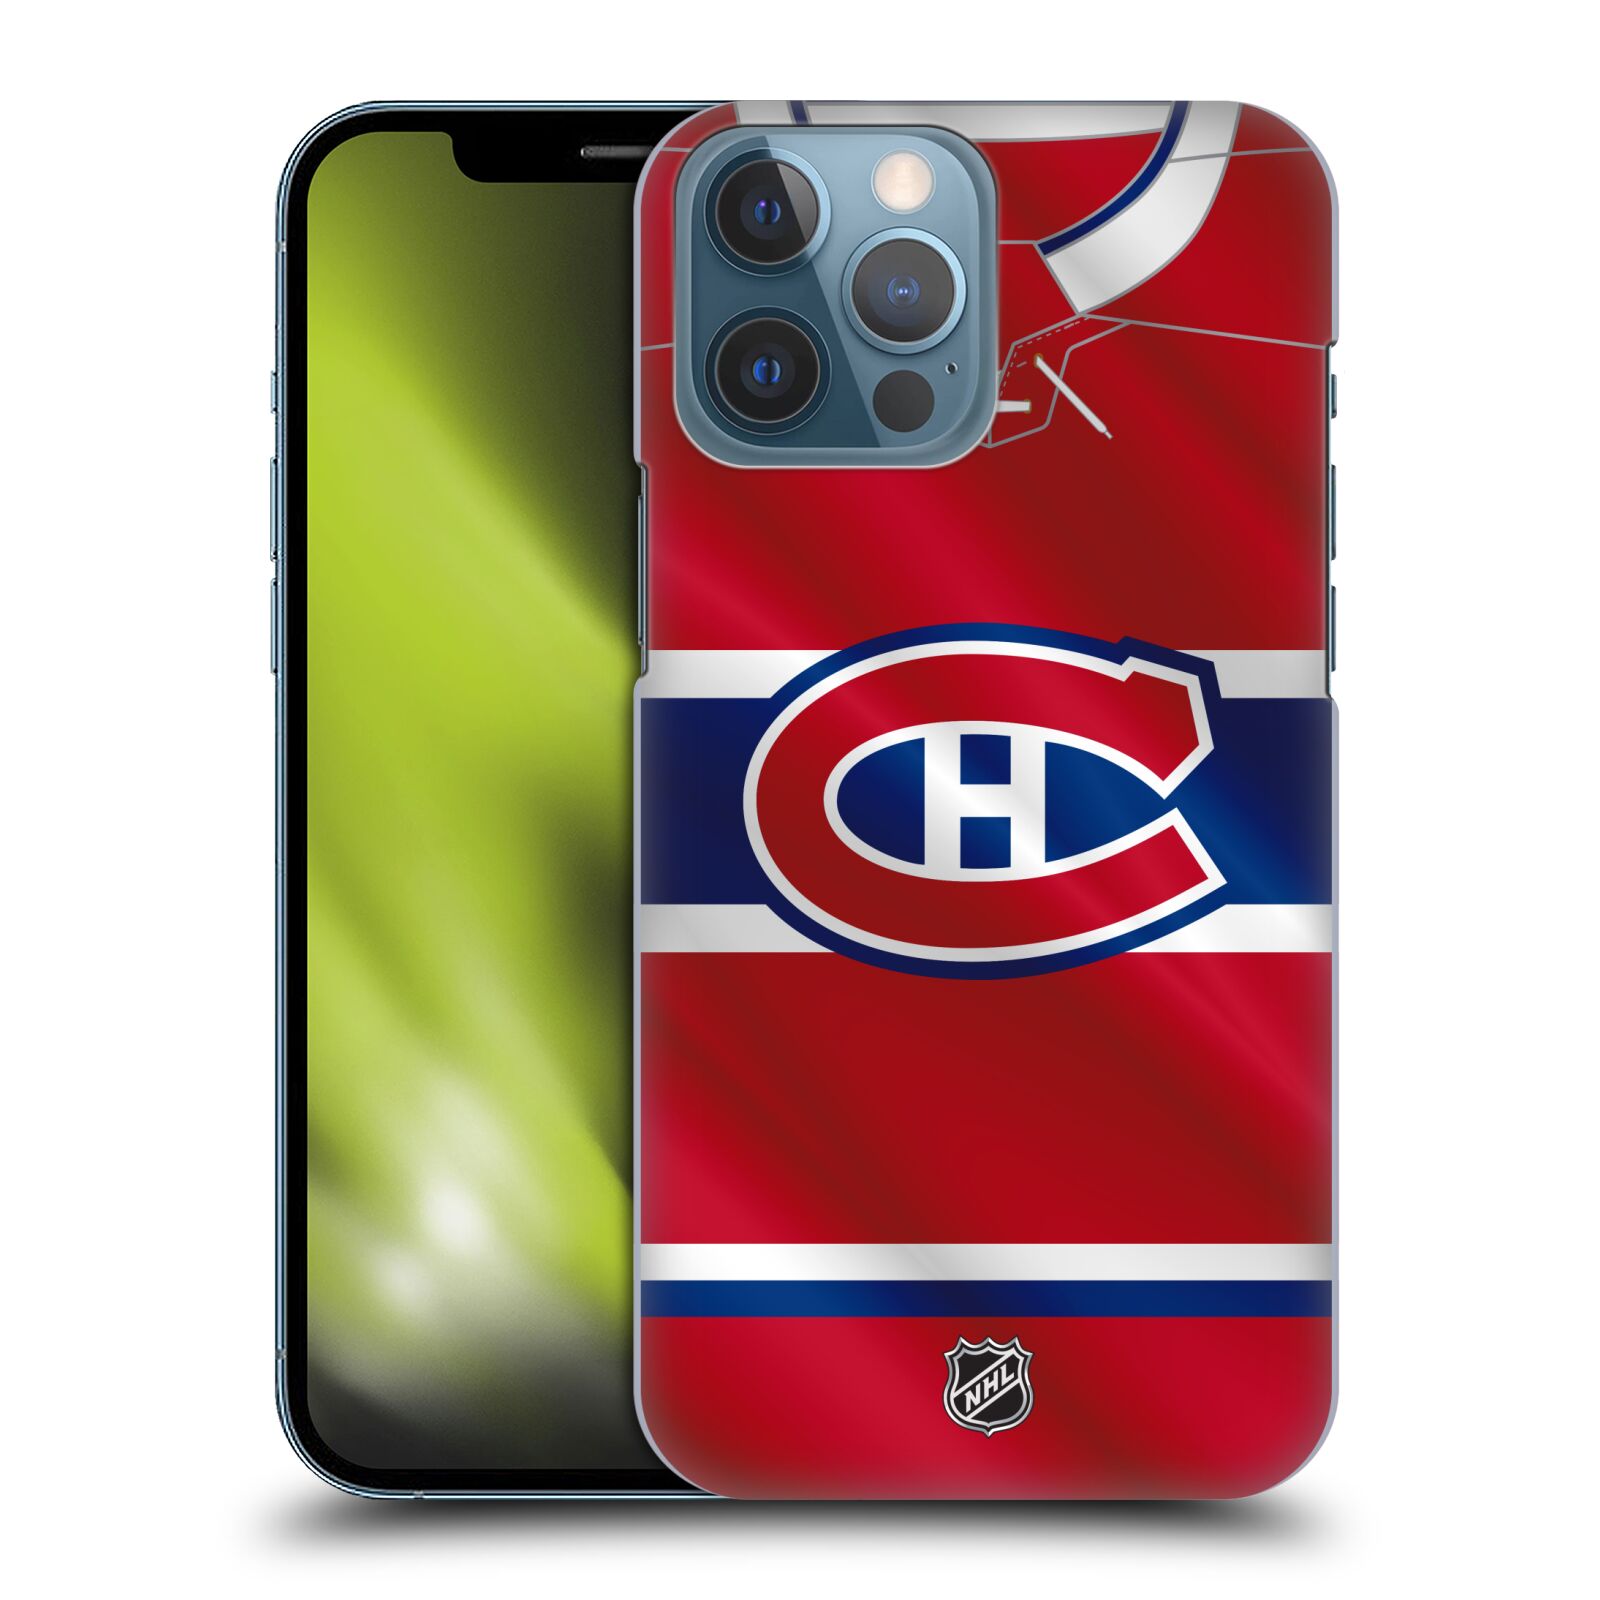 Pouzdro na mobil Apple Iphone 13 PRO MAX - HEAD CASE - Hokej NHL - Montreal Canadiens - Dres